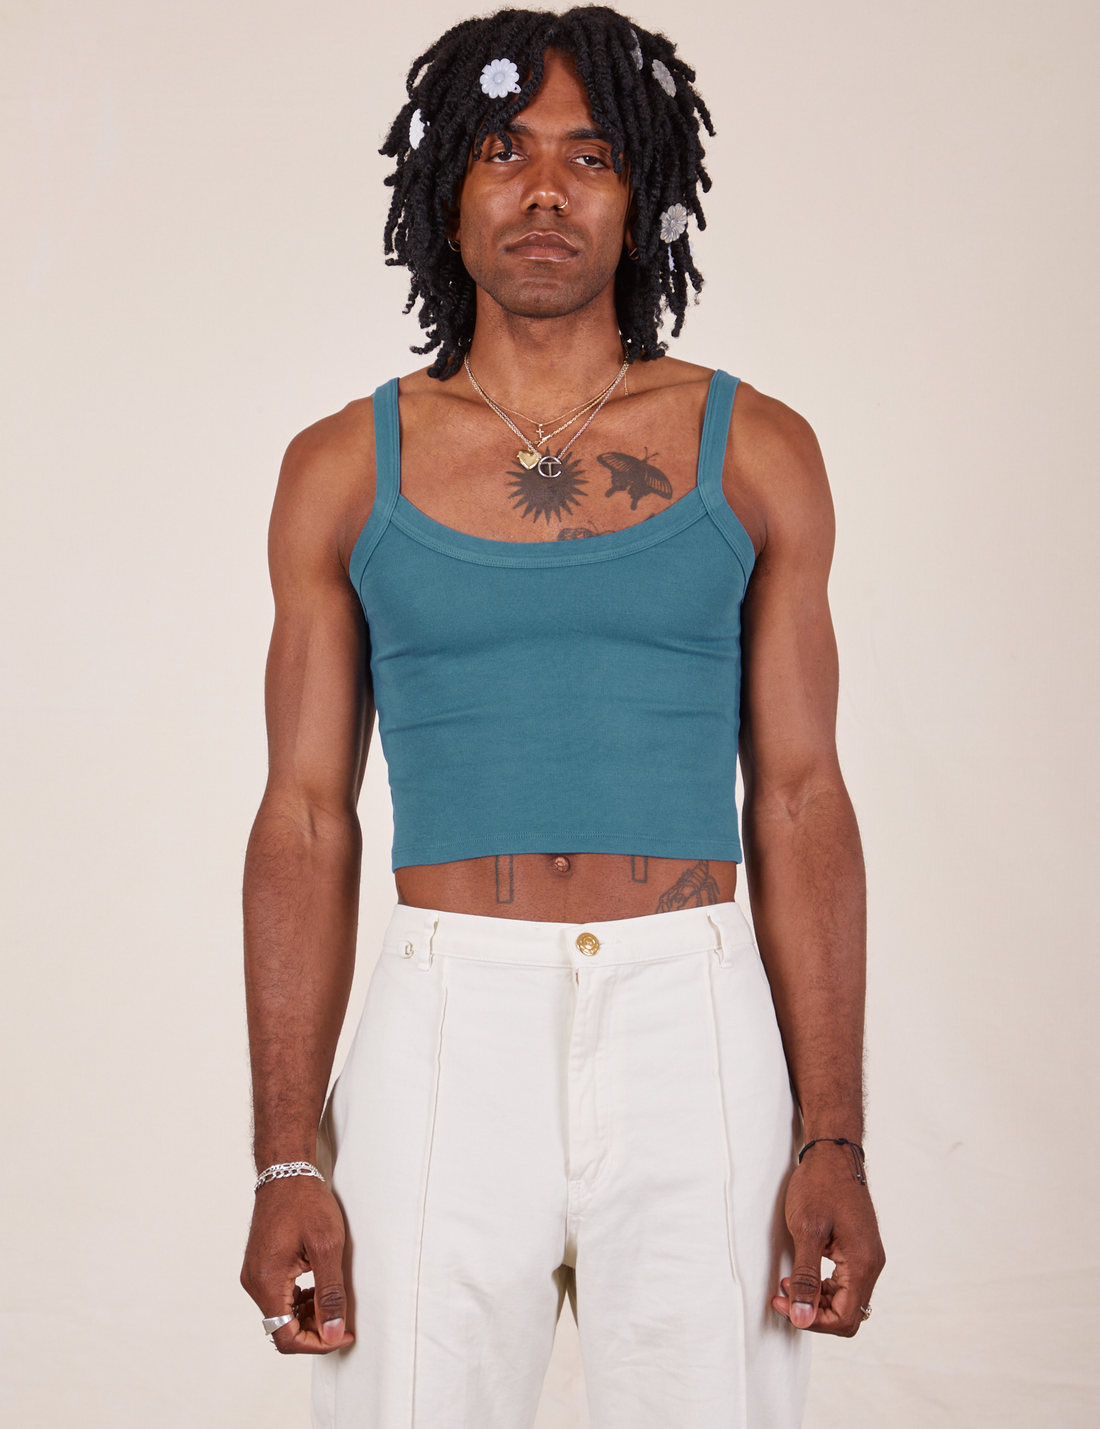 Jerrod is 6'3" and wearing S Cropped Cami in Marine Blue paired with vintage off-white Western Pants